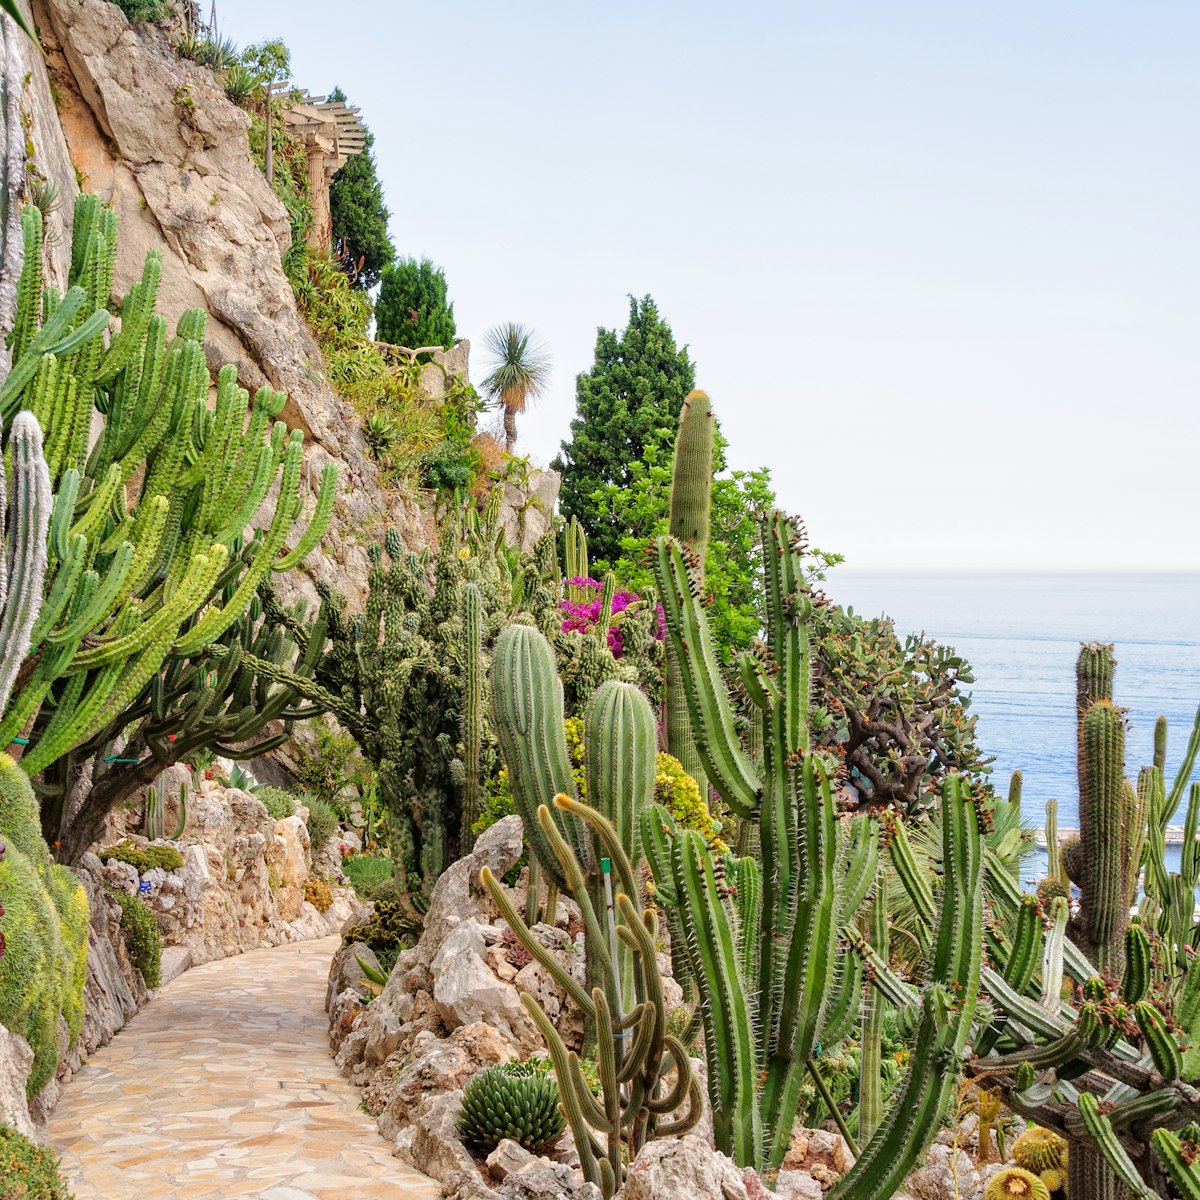 Cacti and other succulents on the cliff side of the Jardin Exotique overlooking the Mediterranean Sea in Monaco.